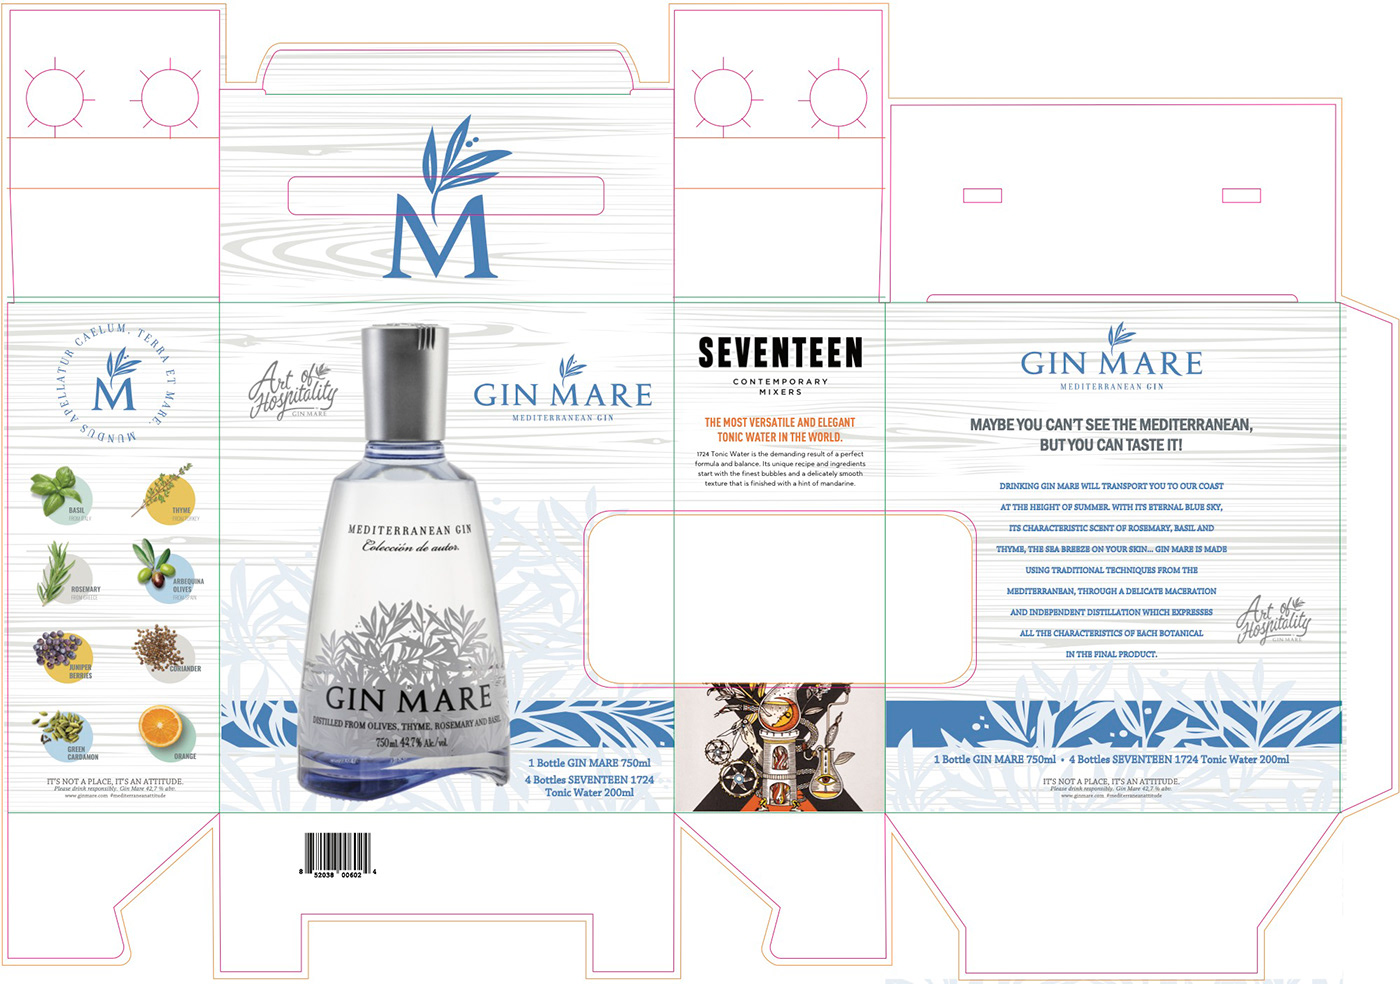 Packaging Gin Mare